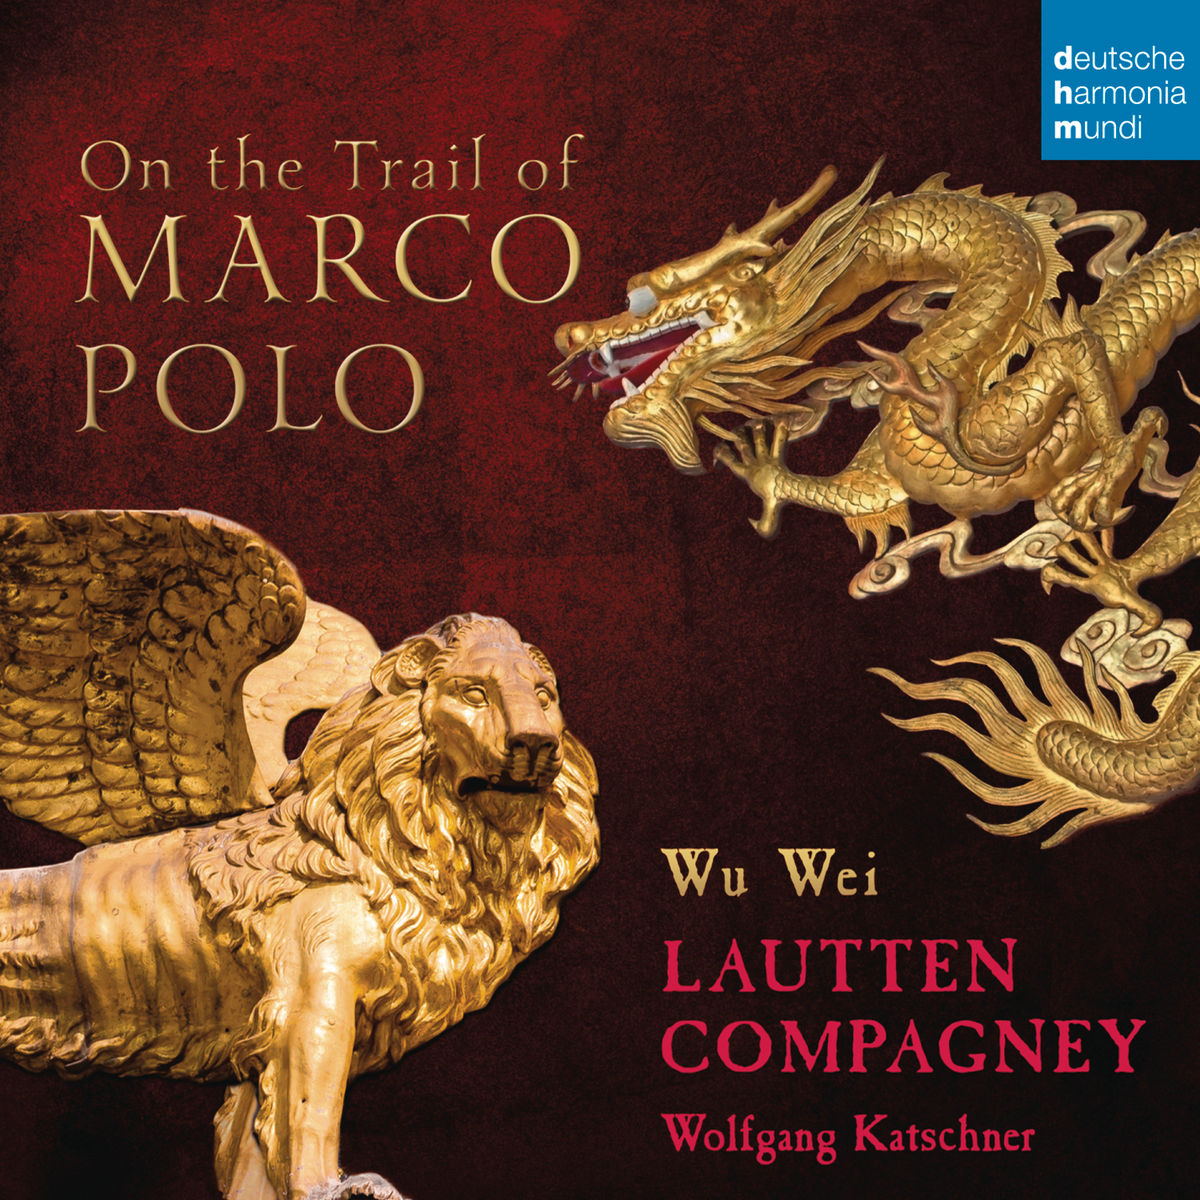 Lautten Compagney - On the Trail of Marco Polo (2015) [Qobuz FLAC 24bit/48kHz]